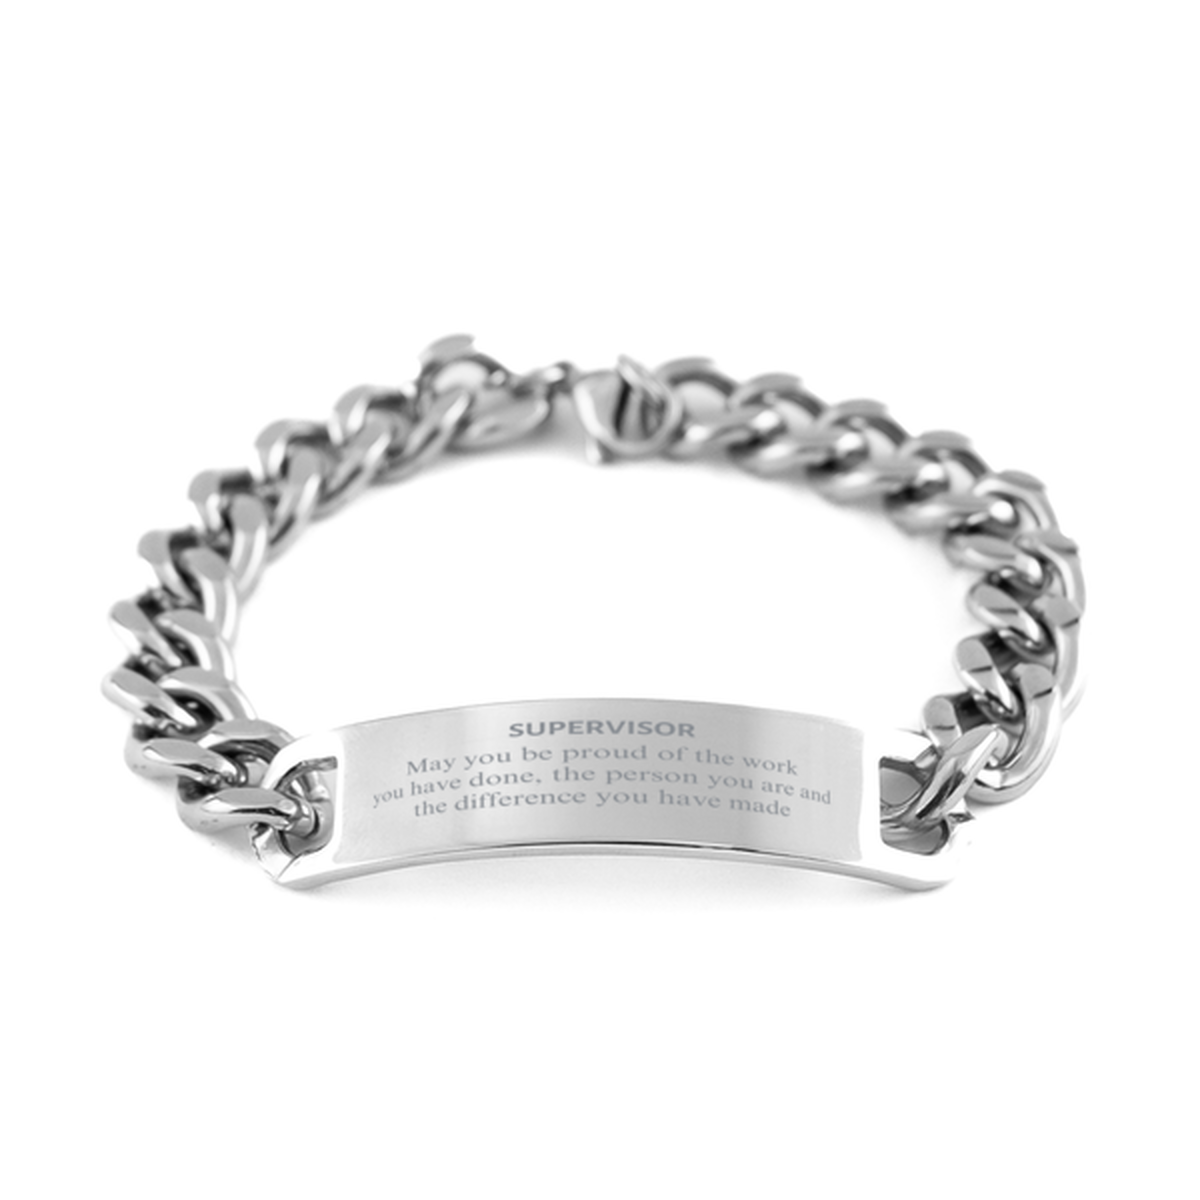 Supervisor May you be proud of the work you have done, Retirement Supervisor Cuban Chain Stainless Steel Bracelet for Colleague Appreciation Gifts Amazing for Supervisor